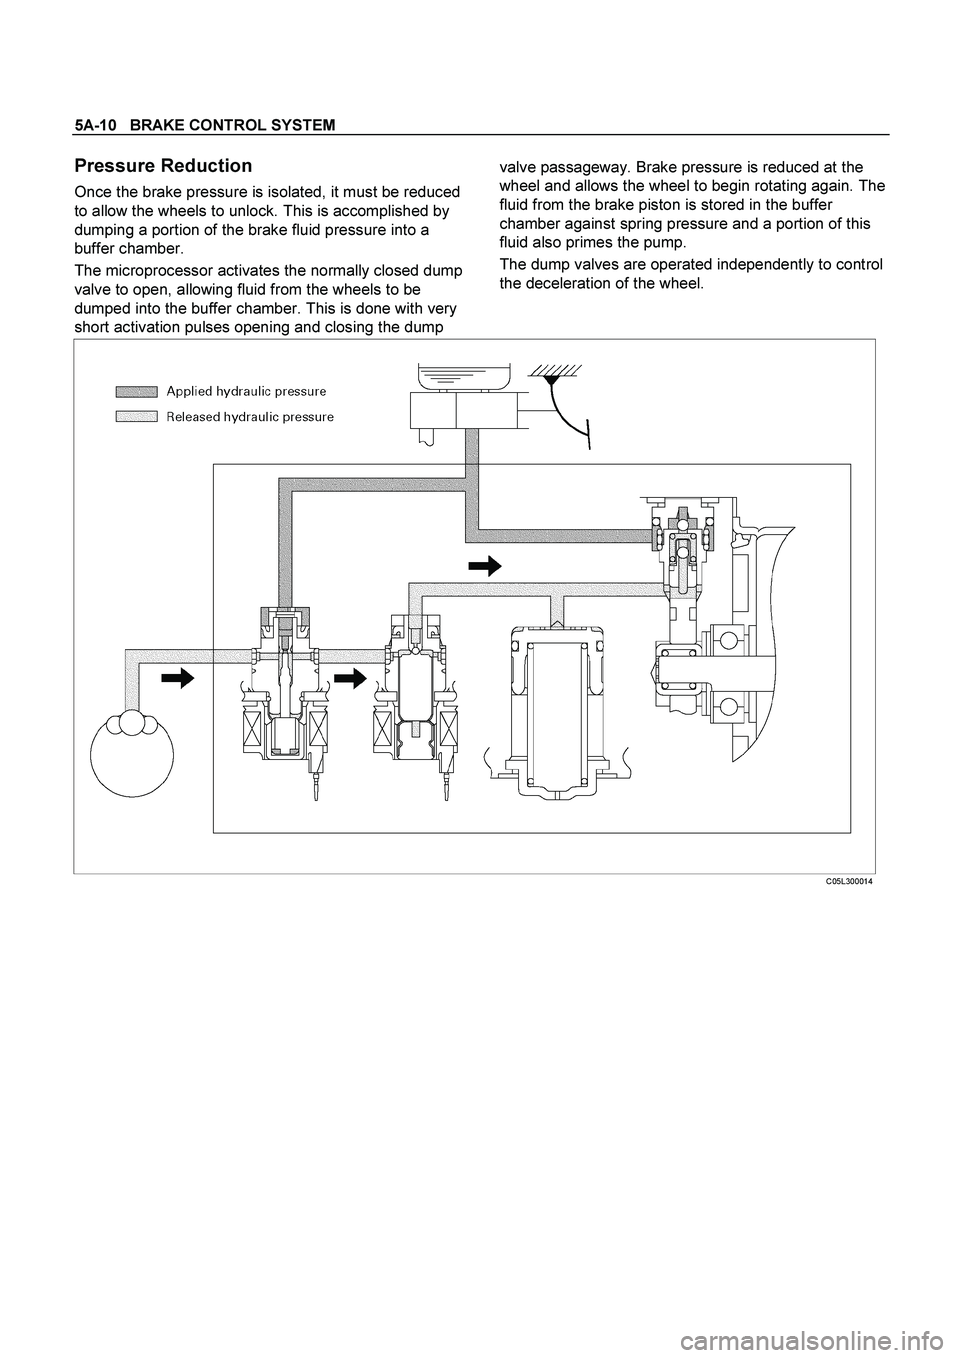 ISUZU TF SERIES 2004  Workshop Manual 5A-10   BRAKE CONTROL SYSTEM
 
Pressure Reduction 
Once the brake pressure is isolated, it must be reduced 
to allow the wheels to unlock. This is accomplished by 
dumping a portion of the brake fluid